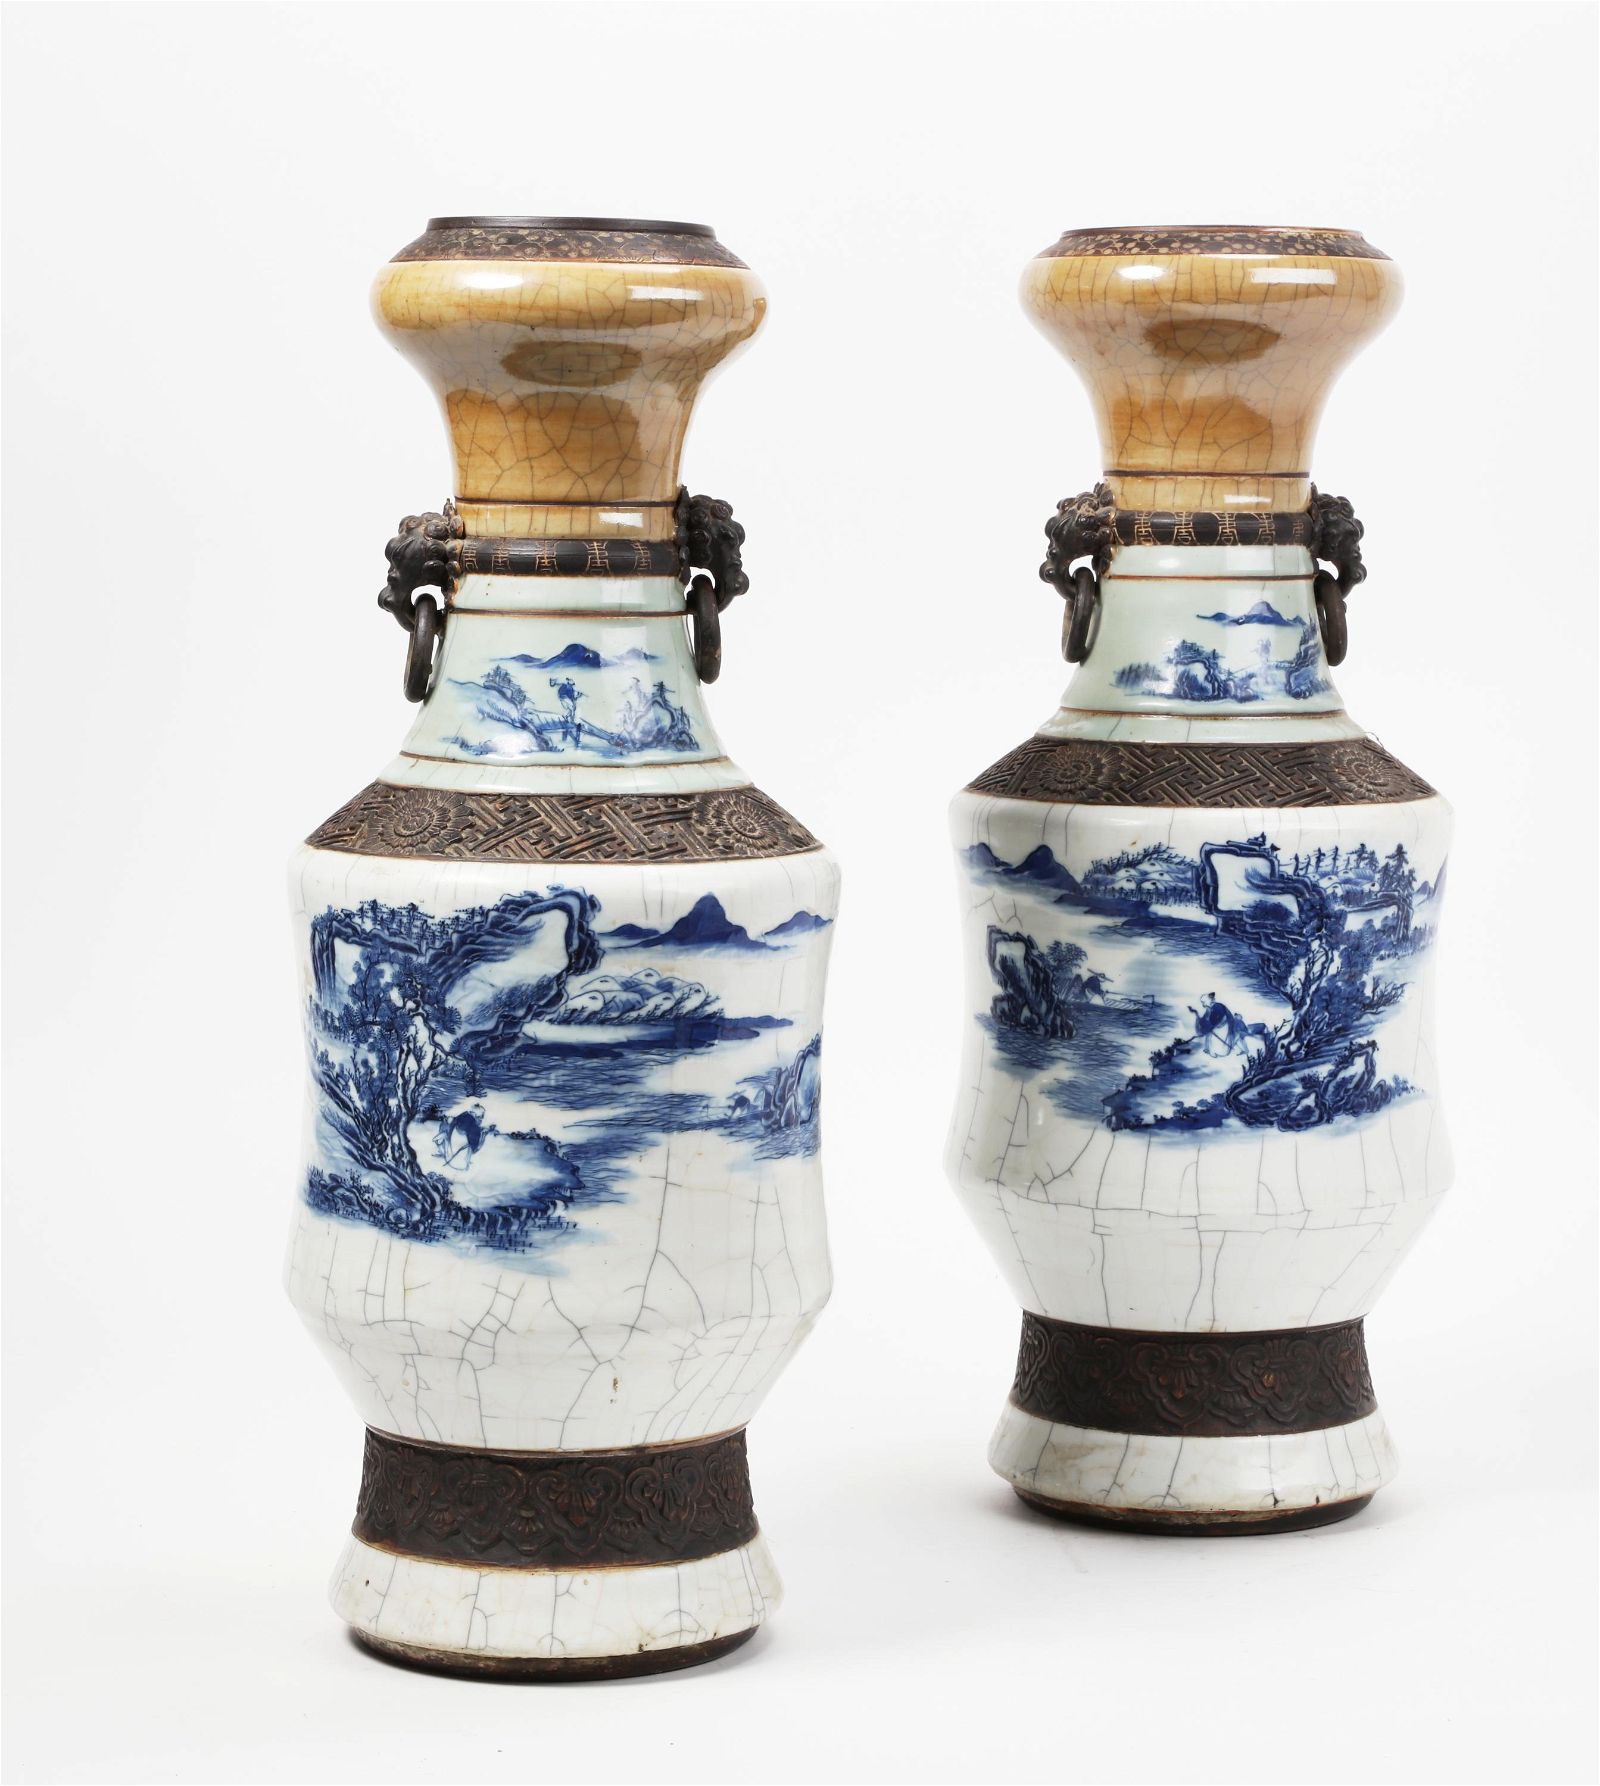 A PAIR OF CHINESE CRACKLE GLAZE 2fb26e0